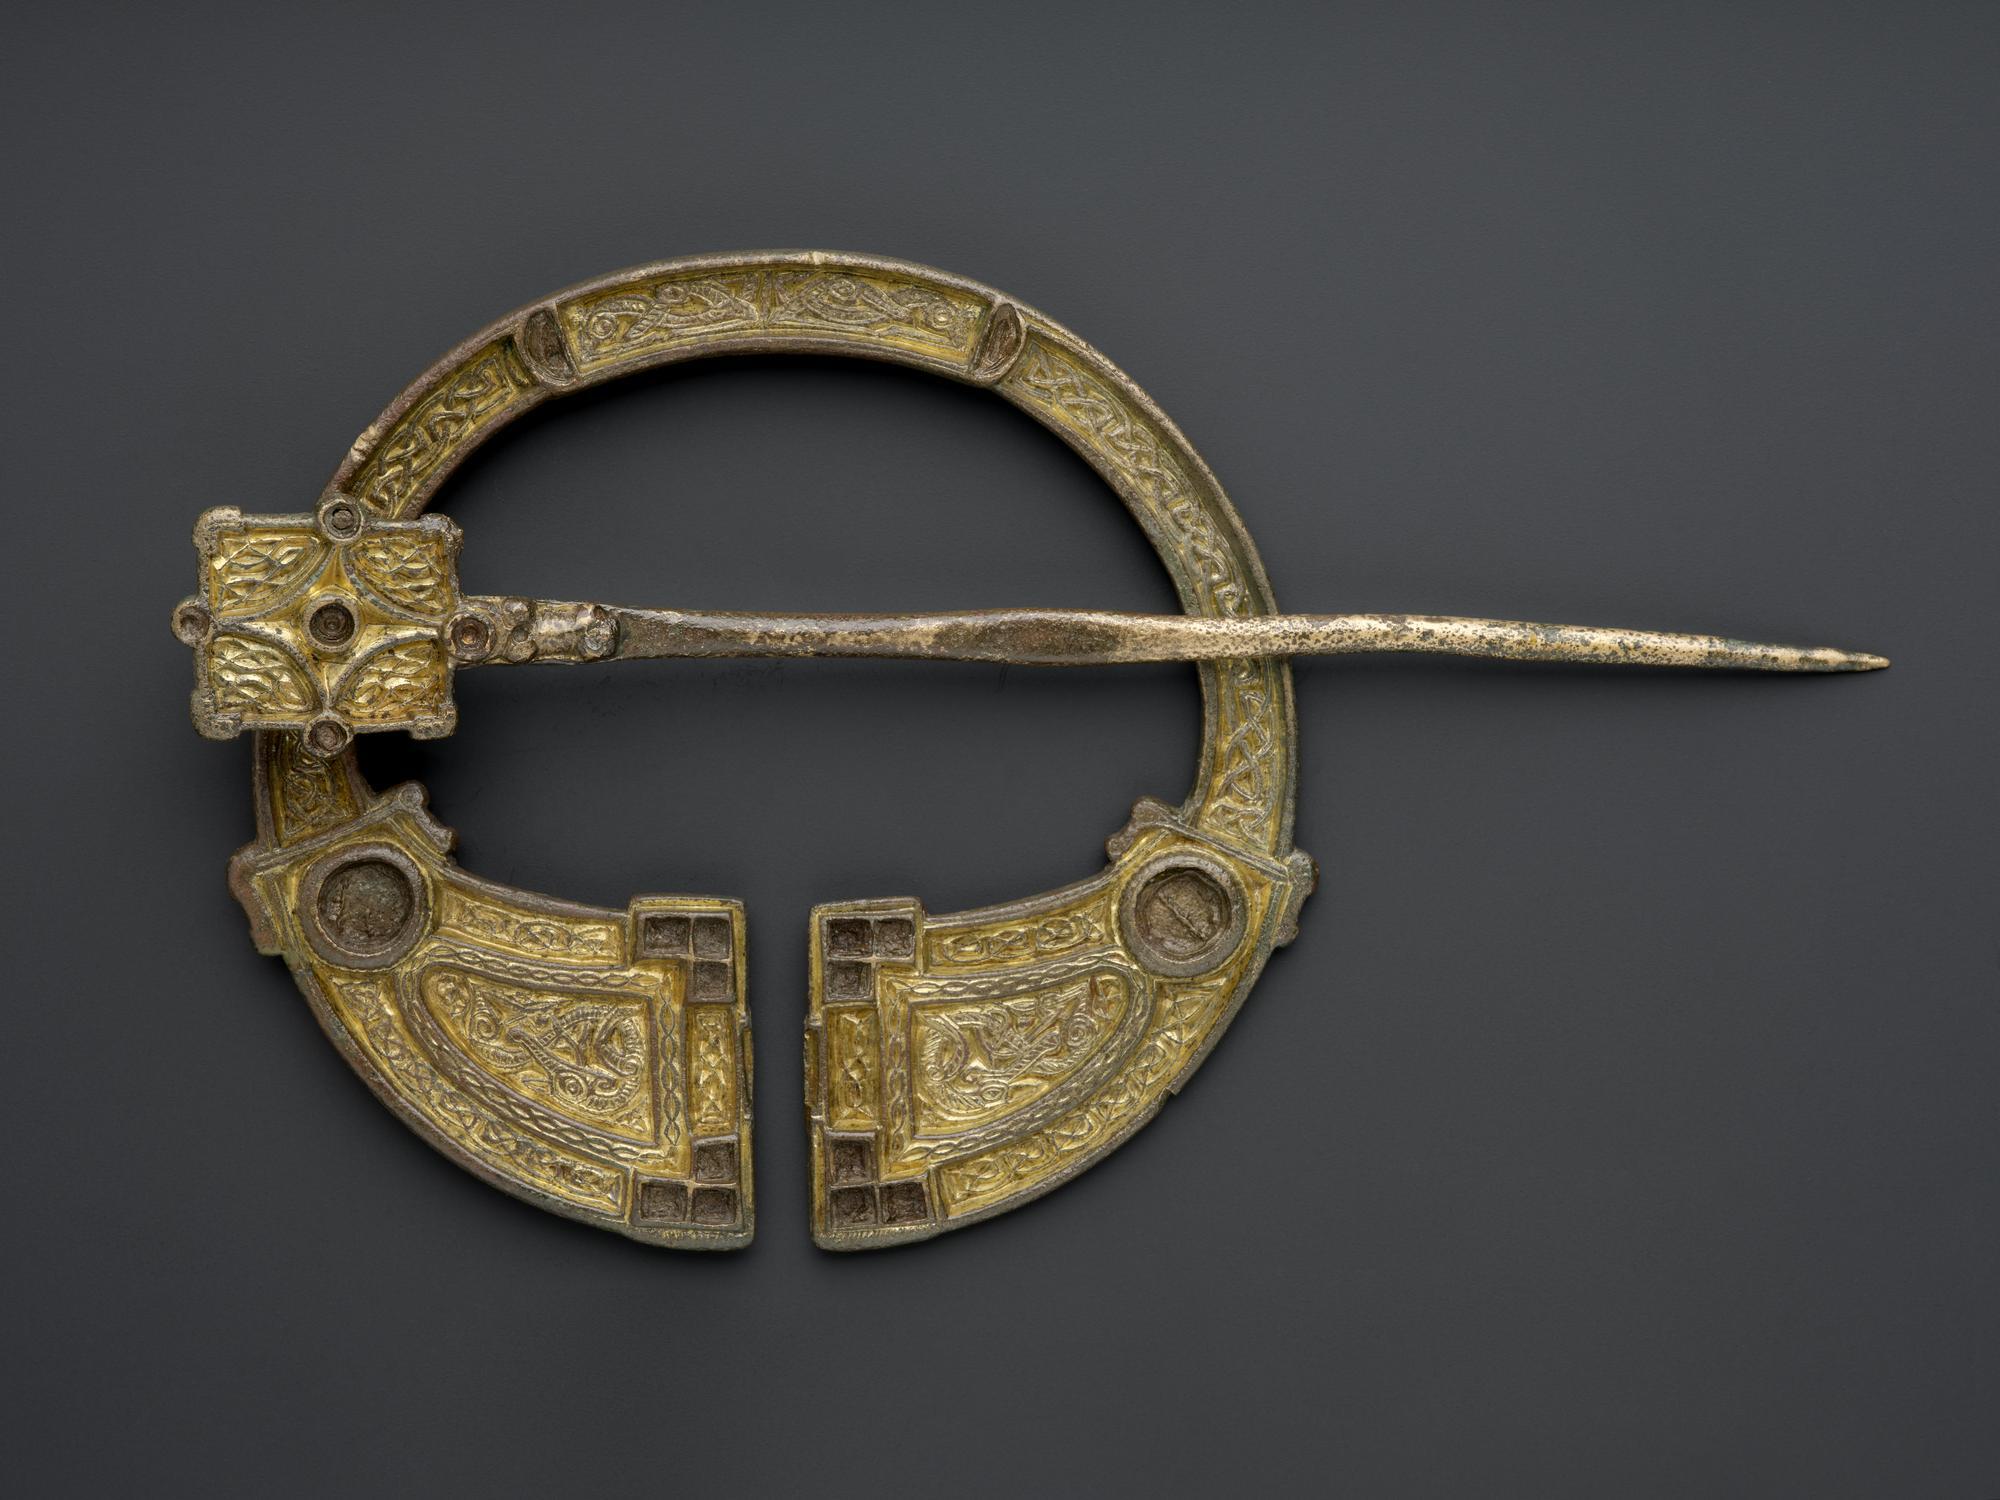 Image of Brooch of gilt bronze, penannular with interlaced ornament, from Mull, 700 - 800 AD © National Museums Scotland